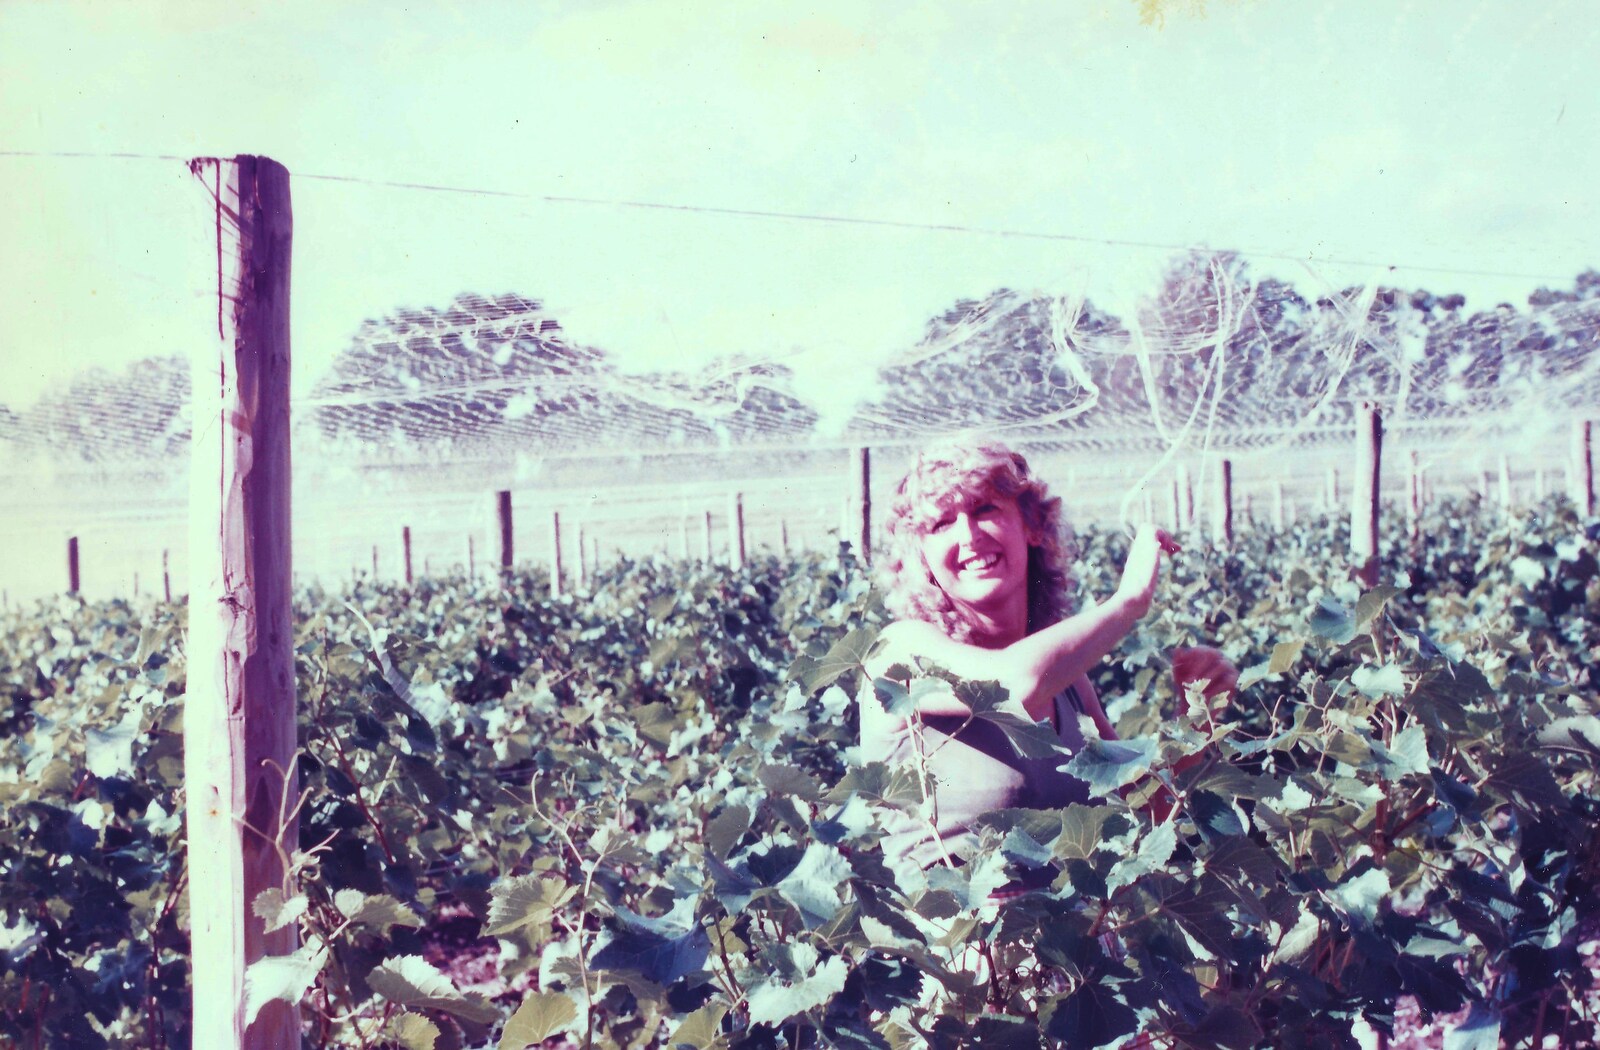 Mike's wife amongst the vines from Constructing a Vineyard, Harrow Road, Bransgore, Dorset - 1st September 1981